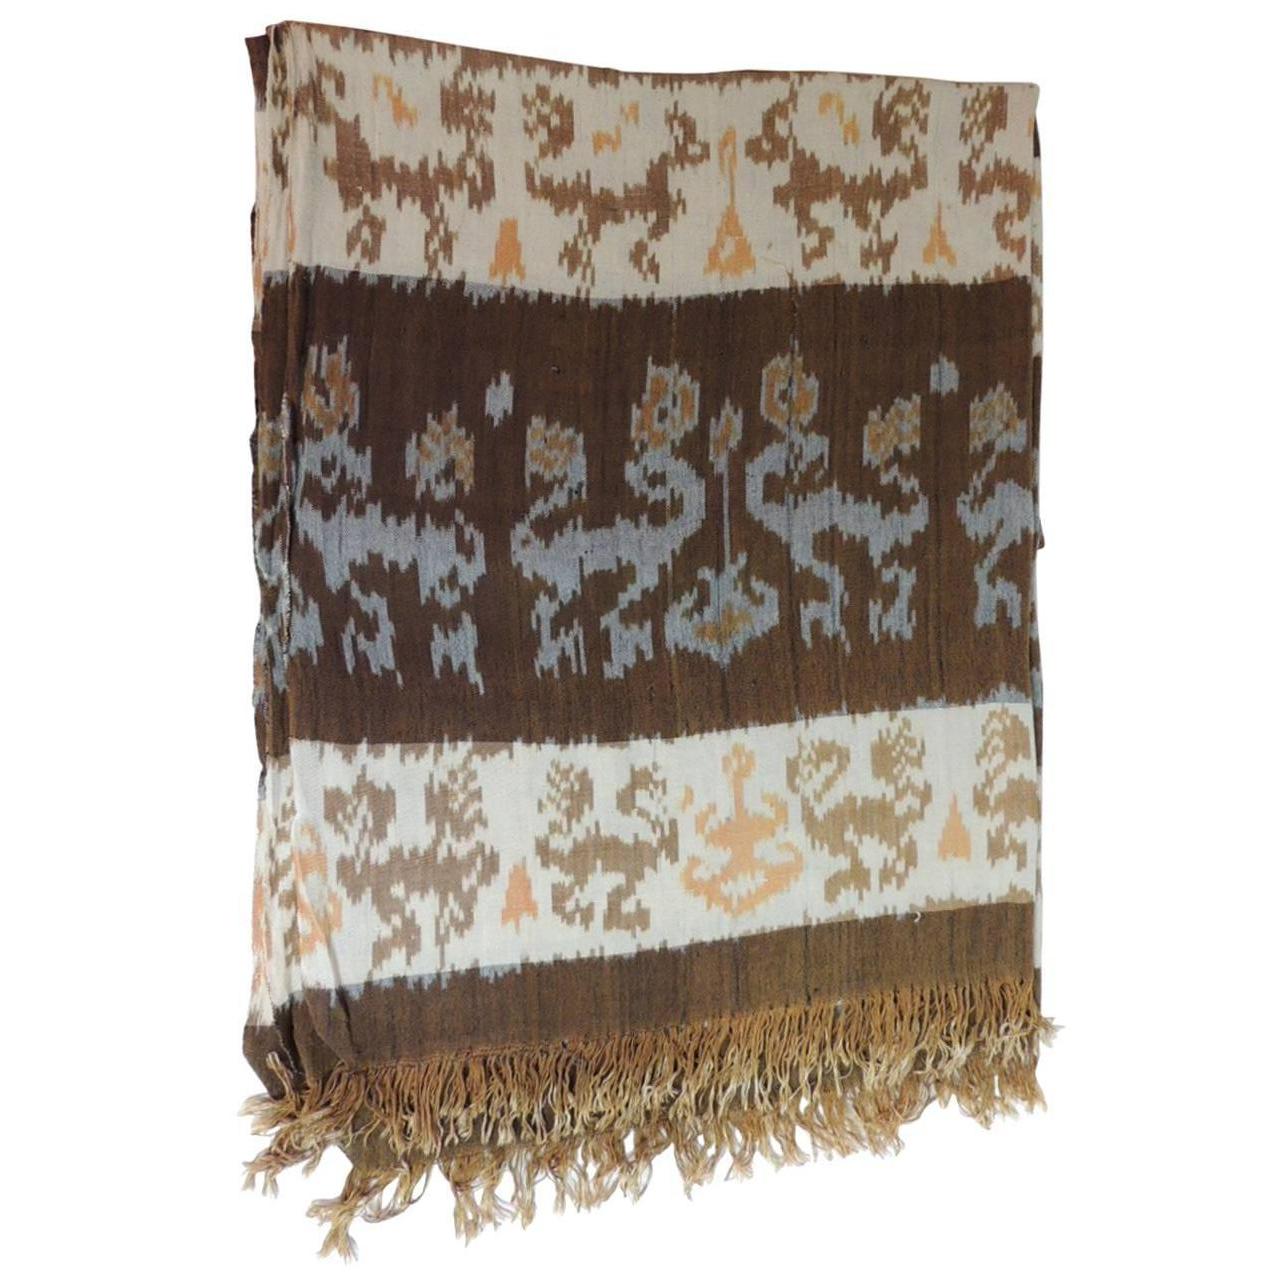 Vintage Woven Brown and Yellow Ikat Textile Panel with Fringes